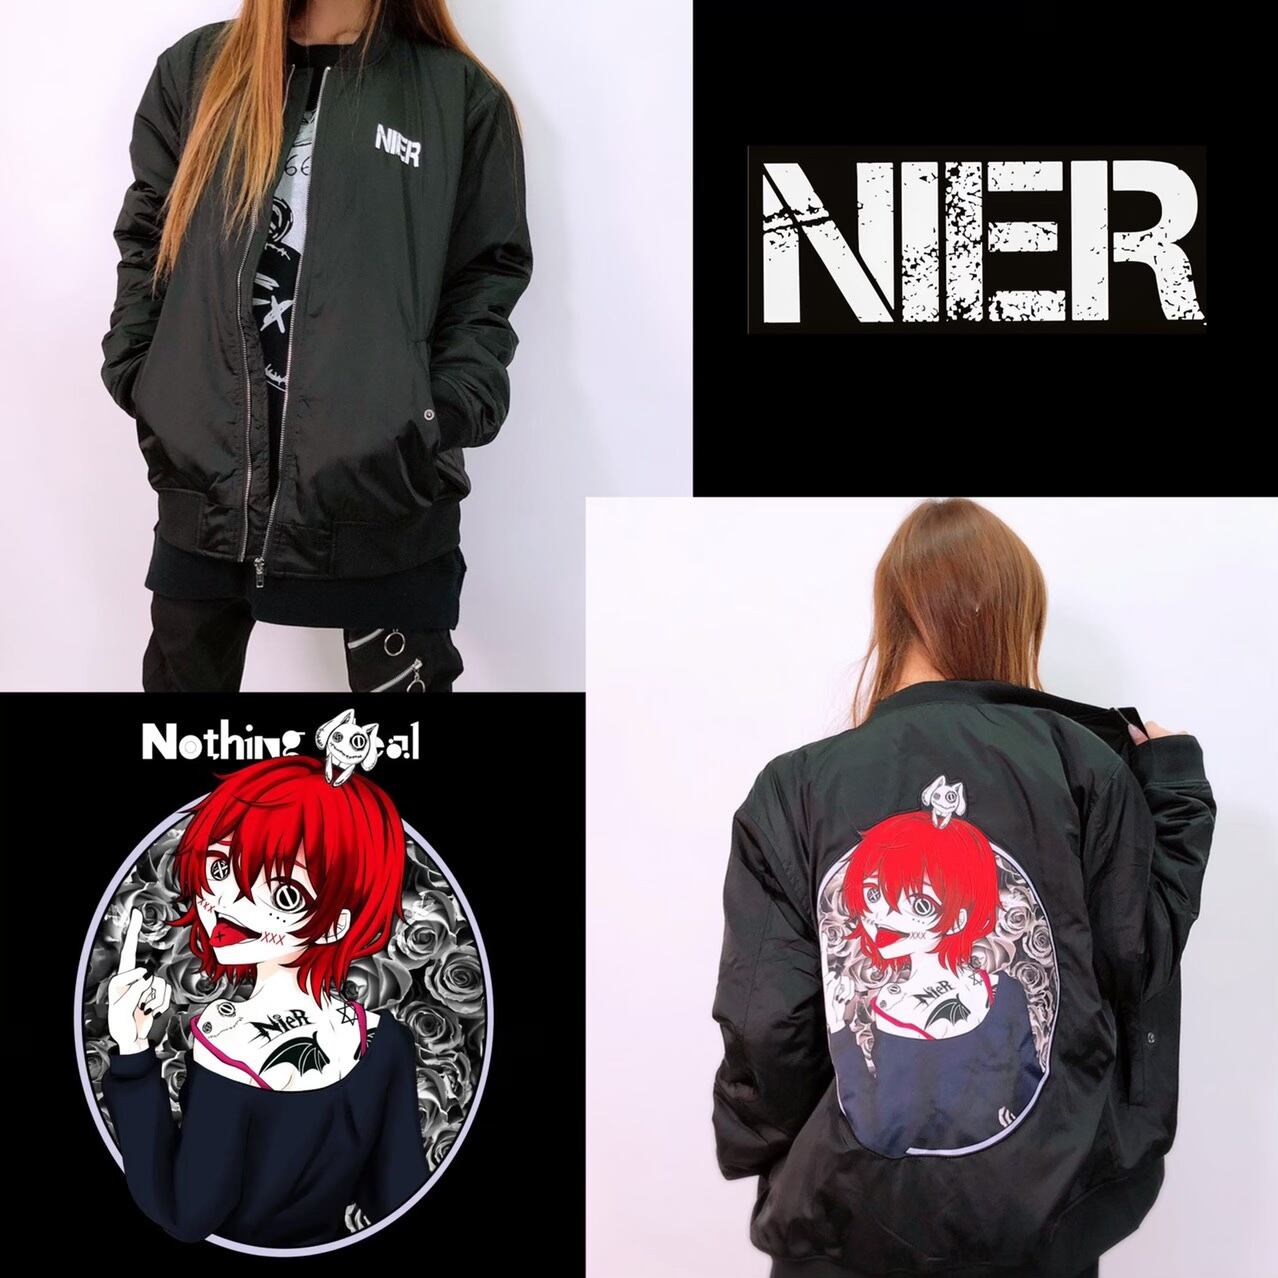 NieRブルゾンジャケット【FRONT ZIP】 | NIER CLOTHING powered by BASE